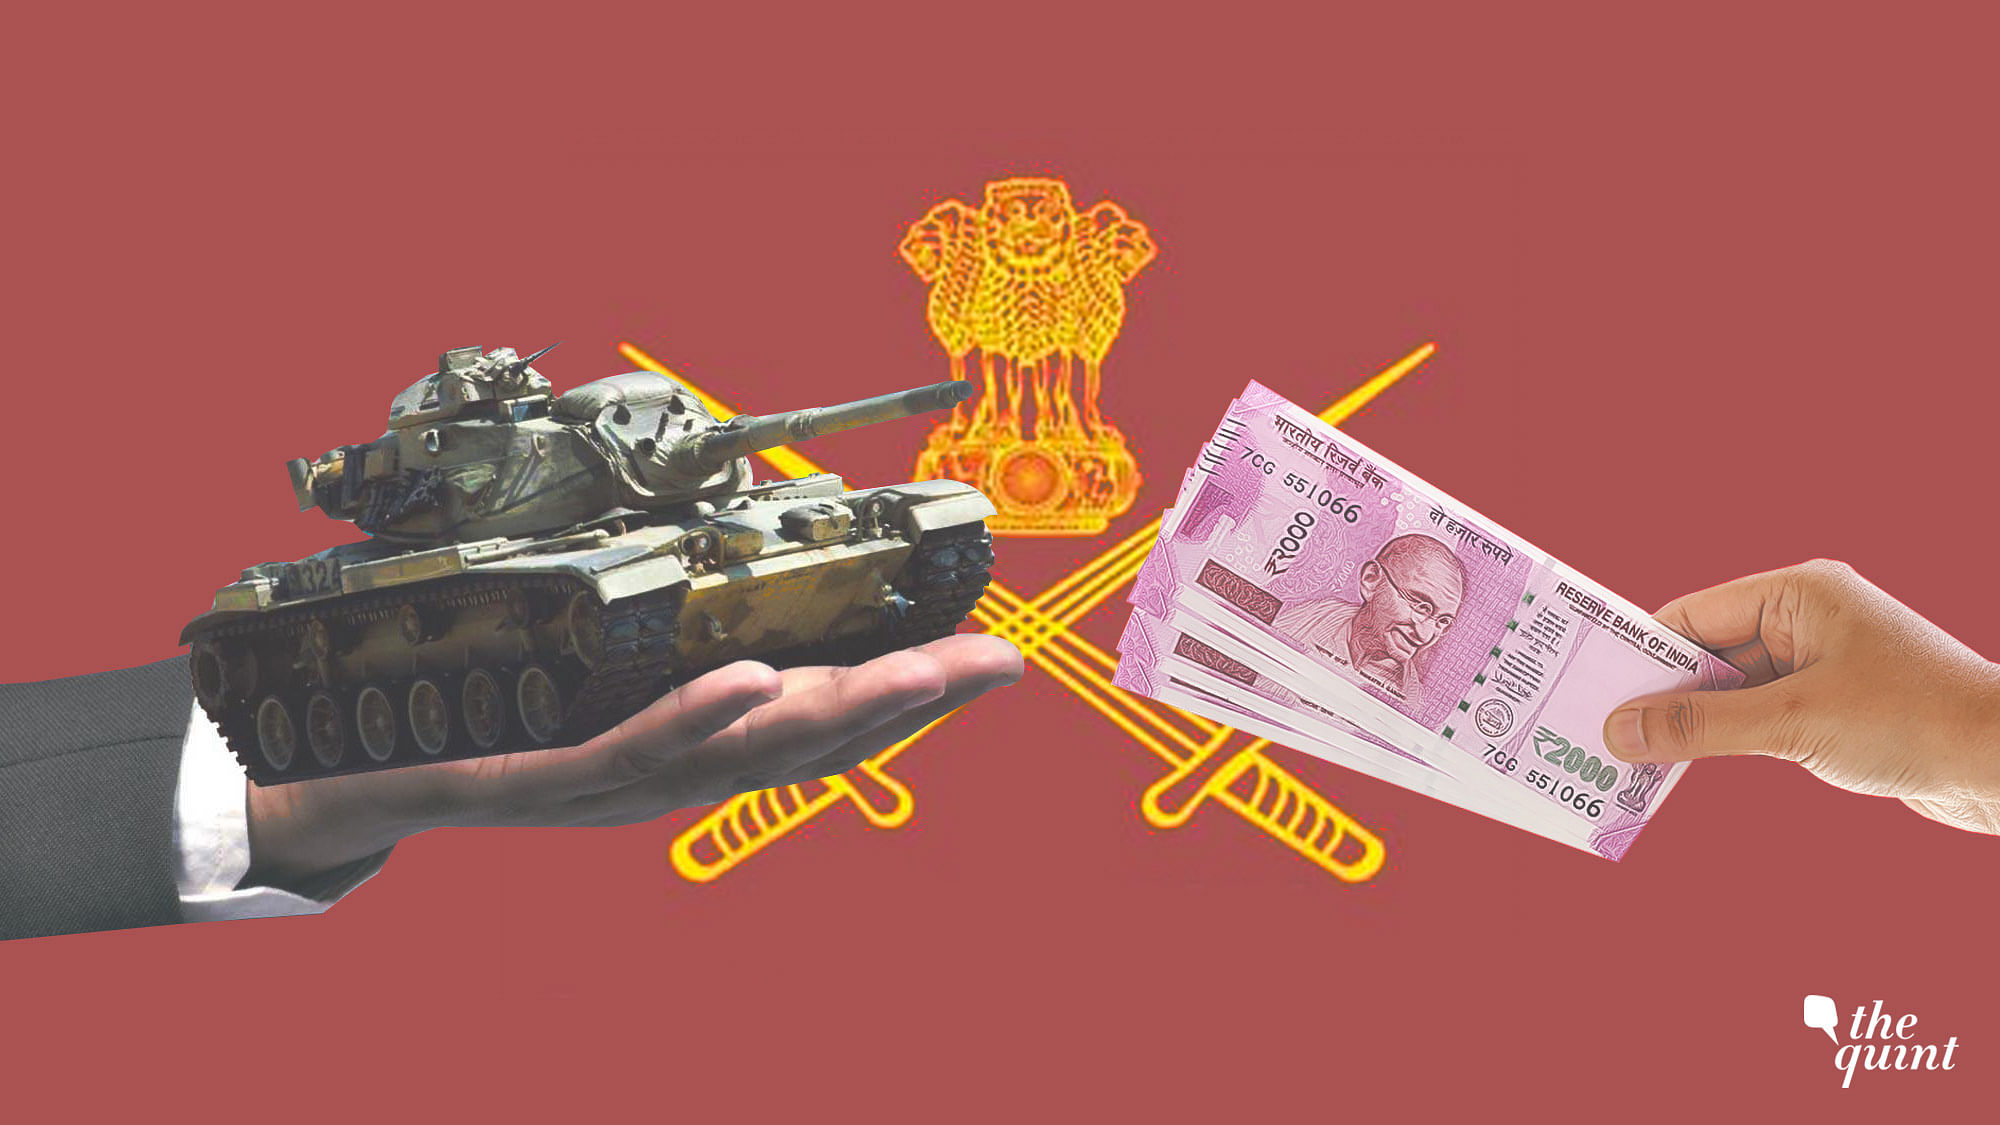 In March 2018, the Army told a parliamentary panel that the funds allocated to it in the defence budget for the next fiscal are insufficient to deal with various security challenges.